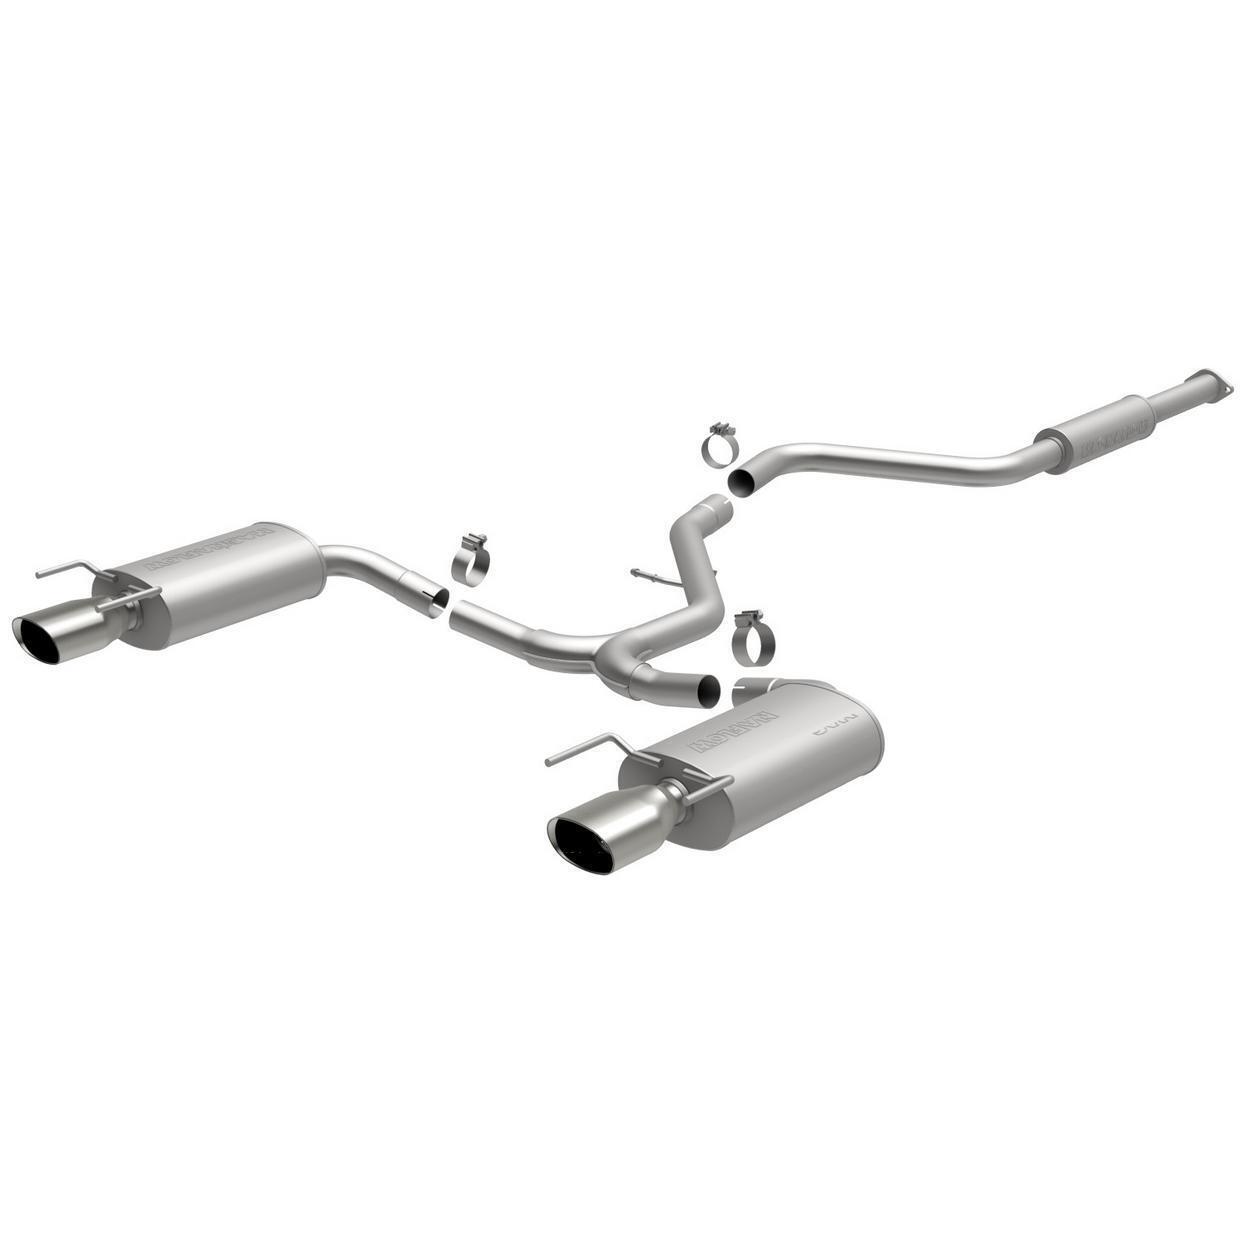 Magnaflow Exhaust System Kit for 2016-2017 Buick Regal Sport Touring Turbo 2.0L